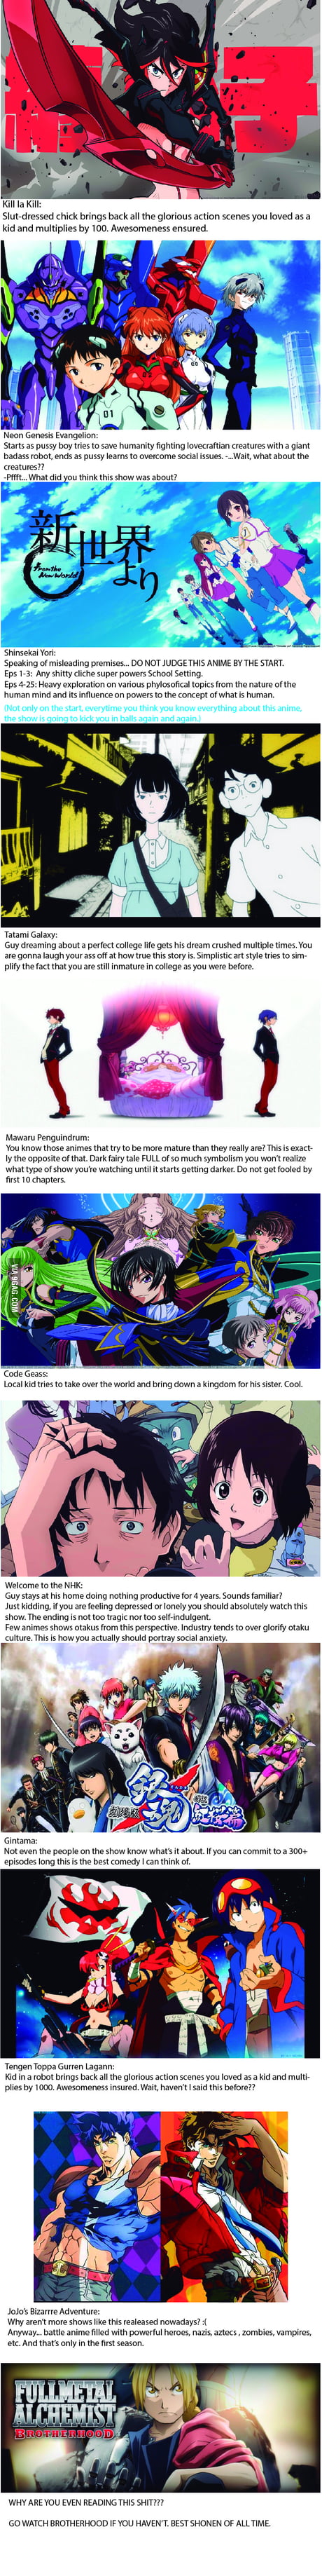 Power scaling in todays anime world - 9GAG